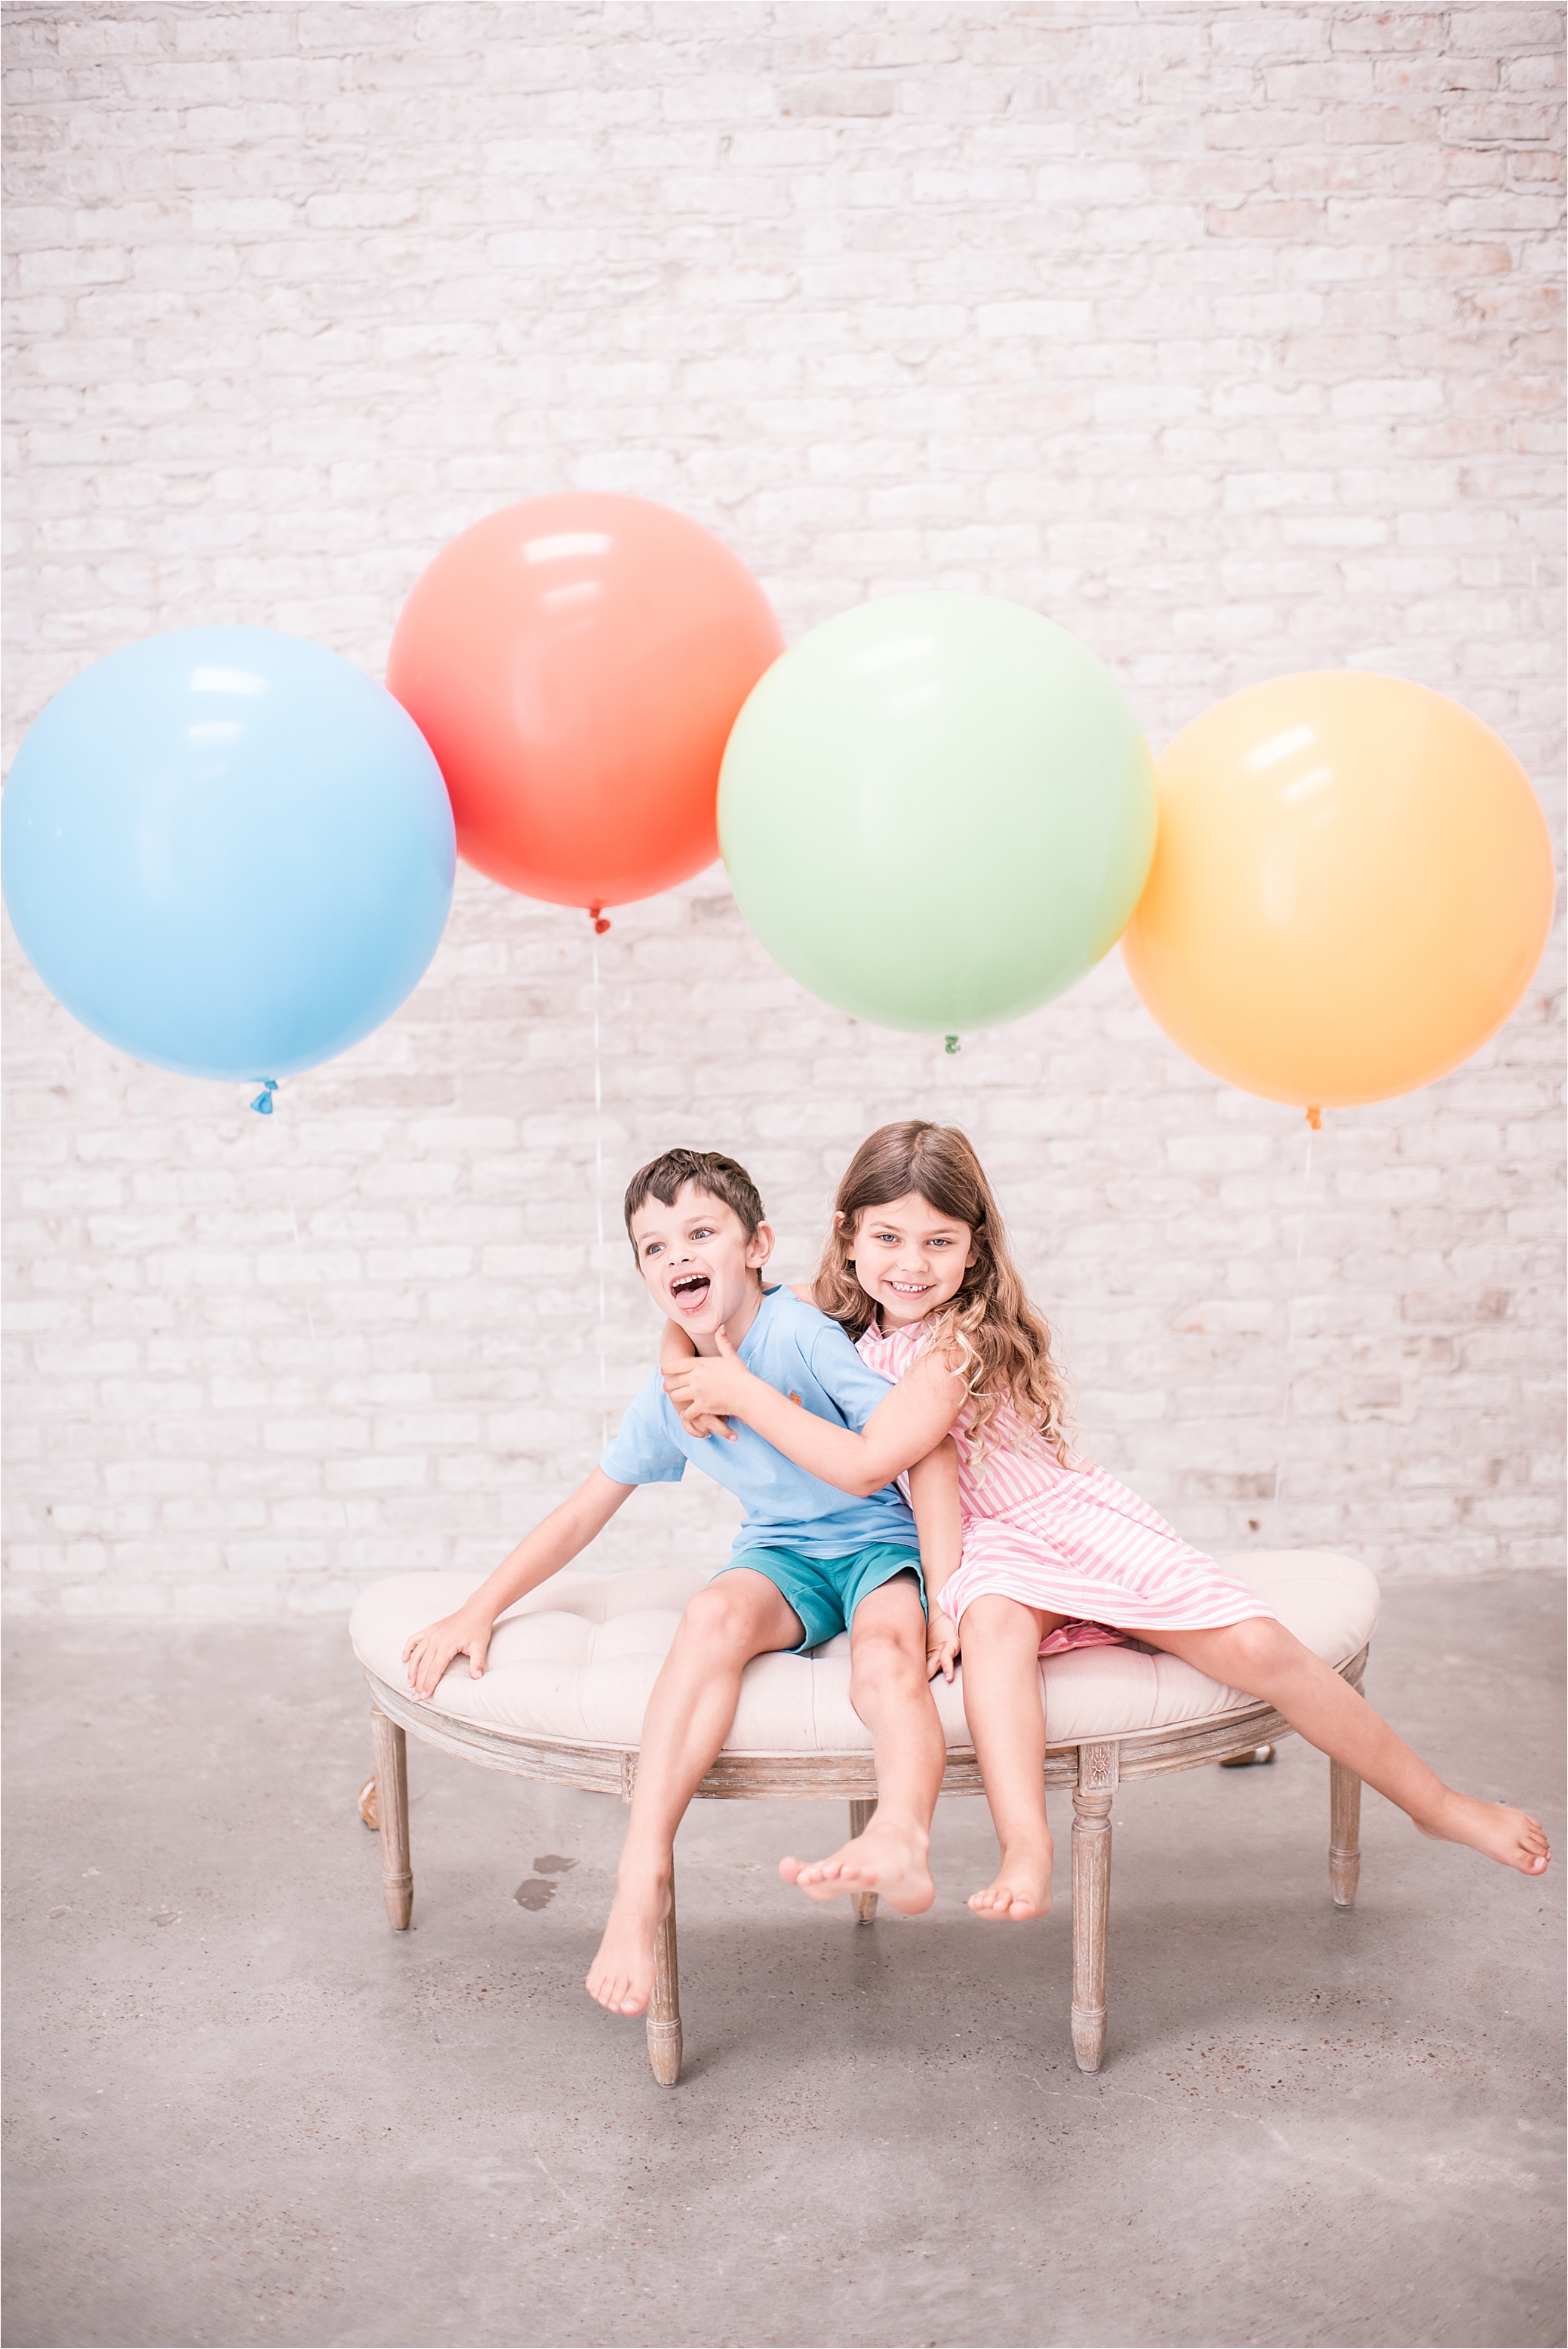 kids being kids during a studio portrait session. white brick and giant helium balloons.